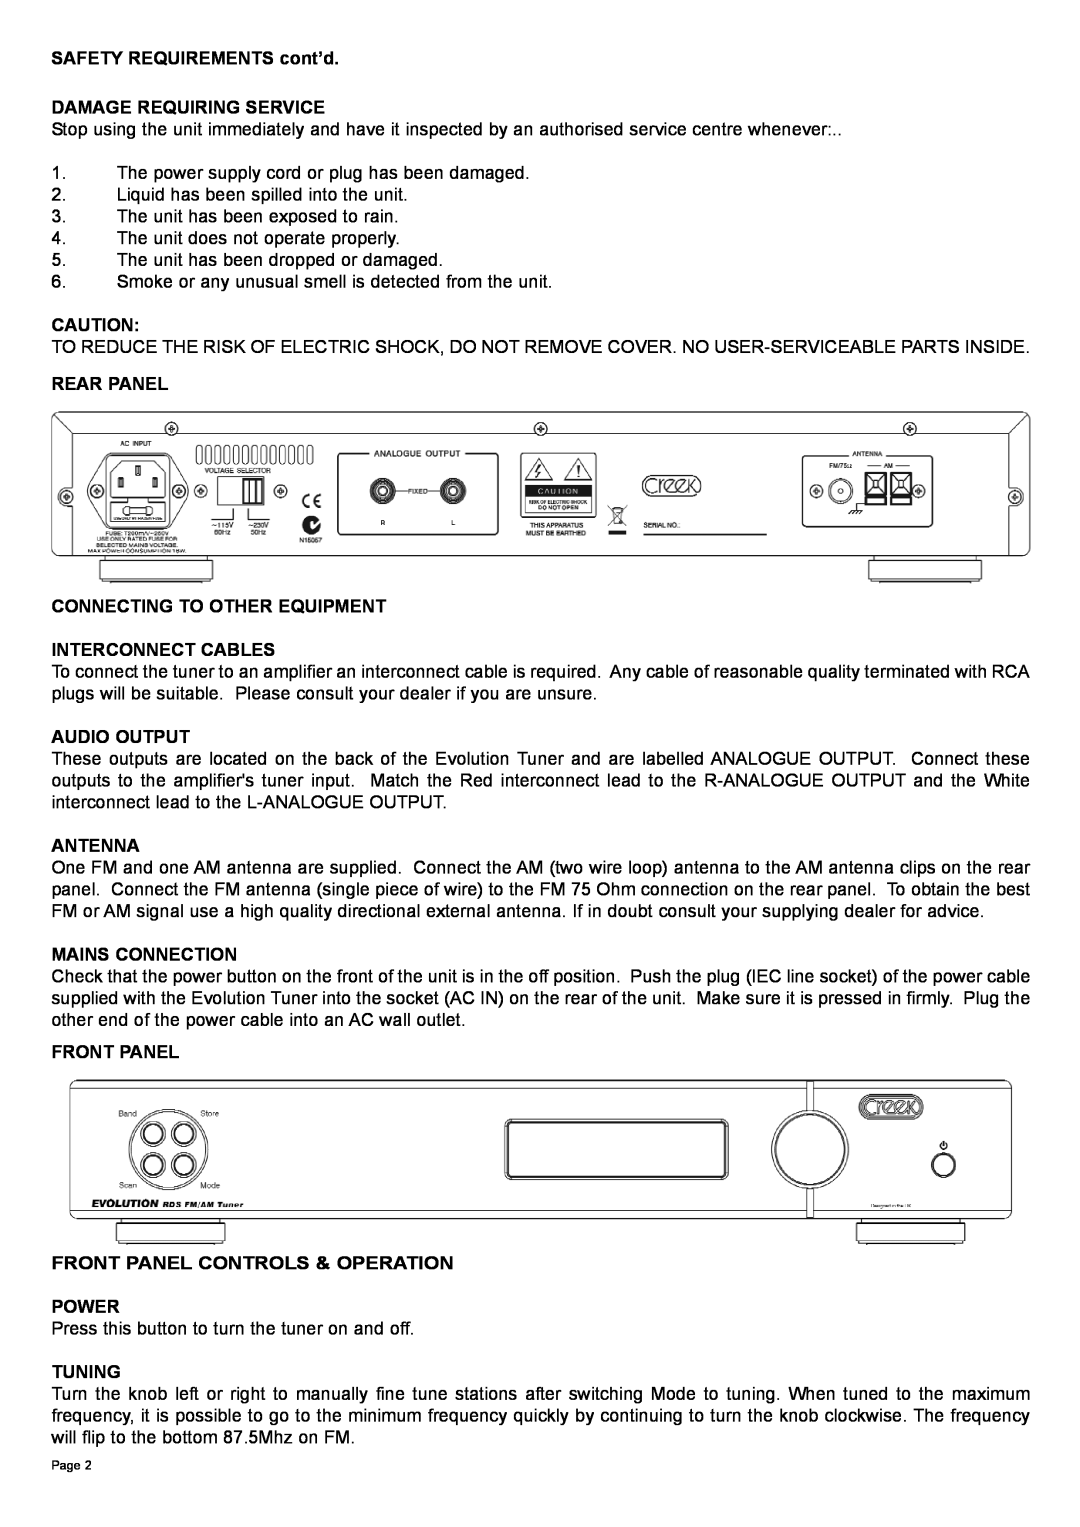 Creek Audio Evolution RDS instruction manual SAFETY REQUIREMENTS cont’d 